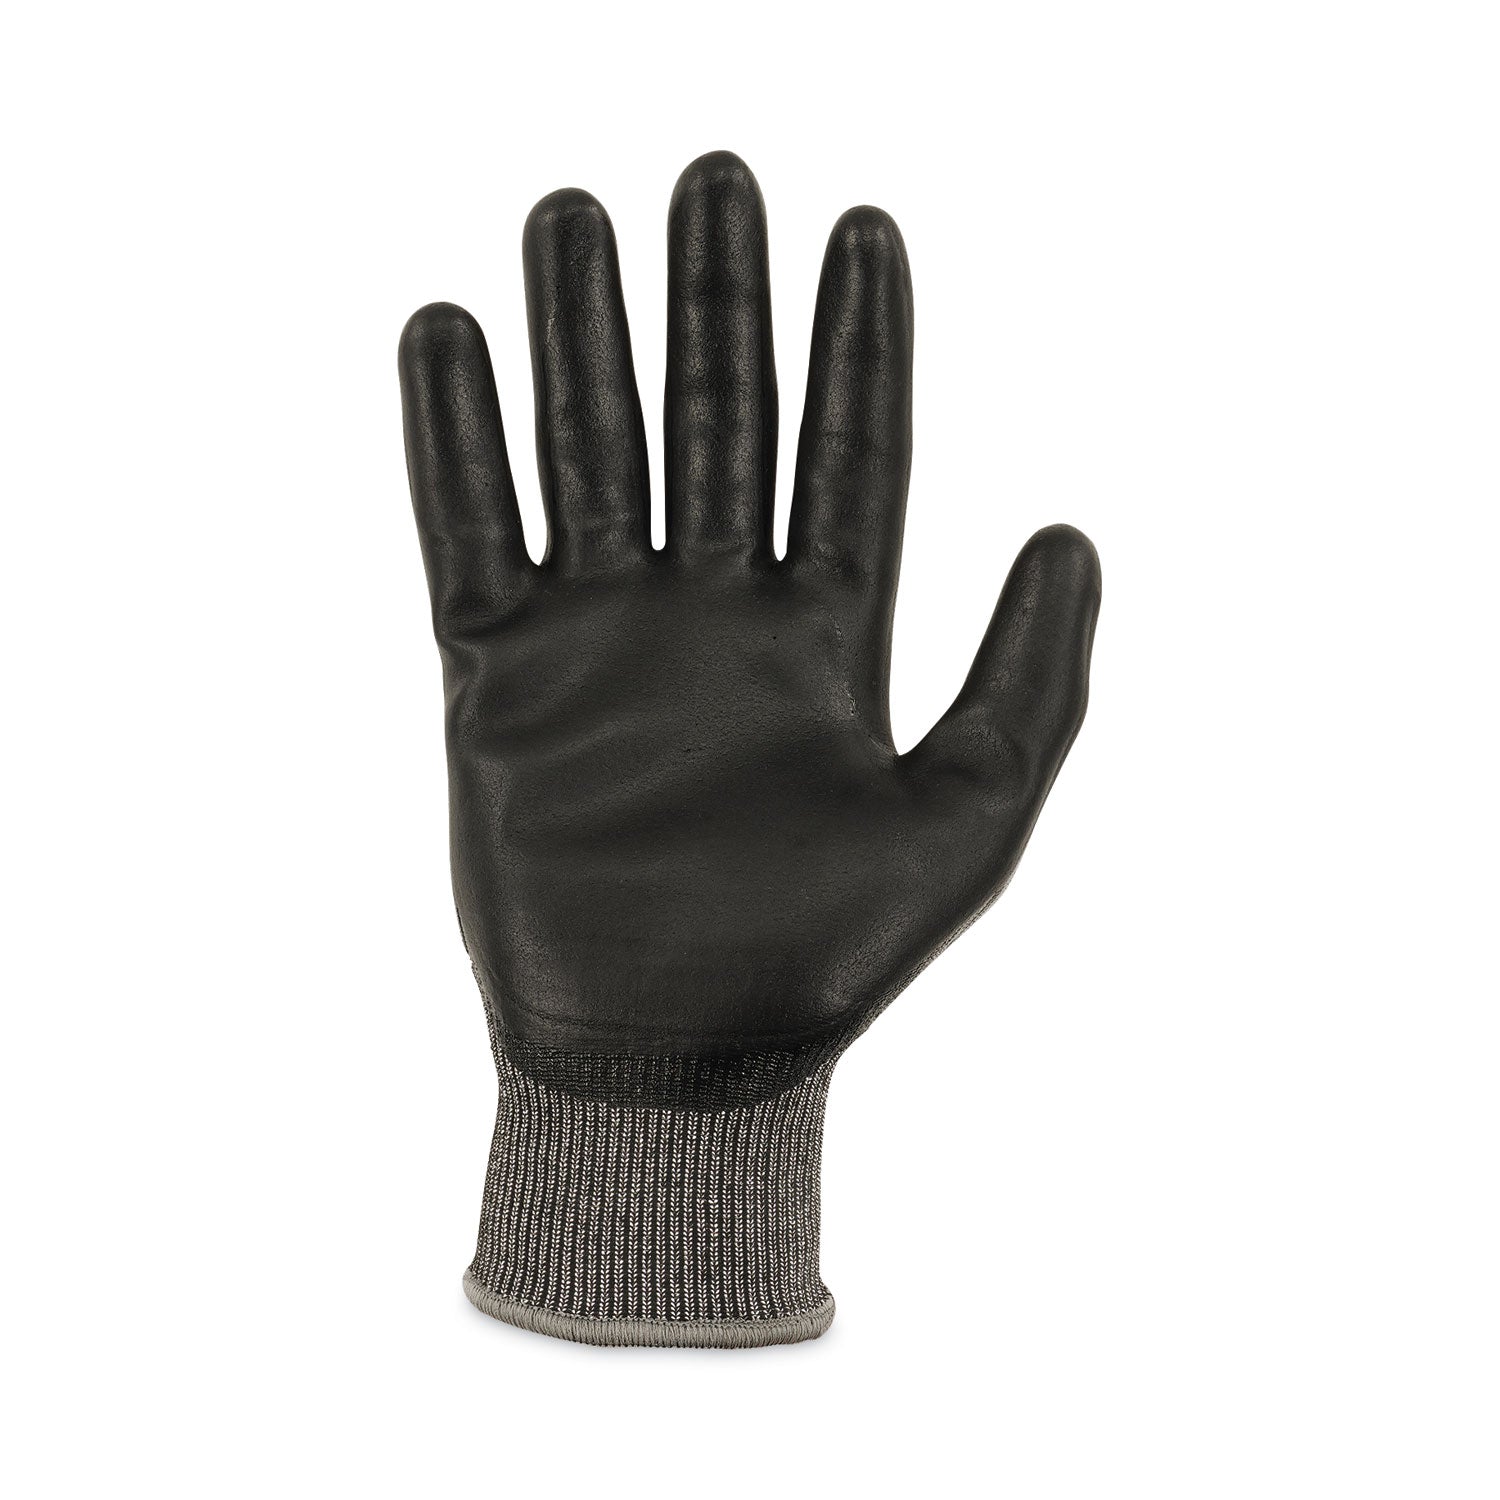 proflex-7072-ansi-a7-nitrile-coated-cr-gloves-gray-large-pair-ships-in-1-3-business-days_ego10314 - 5